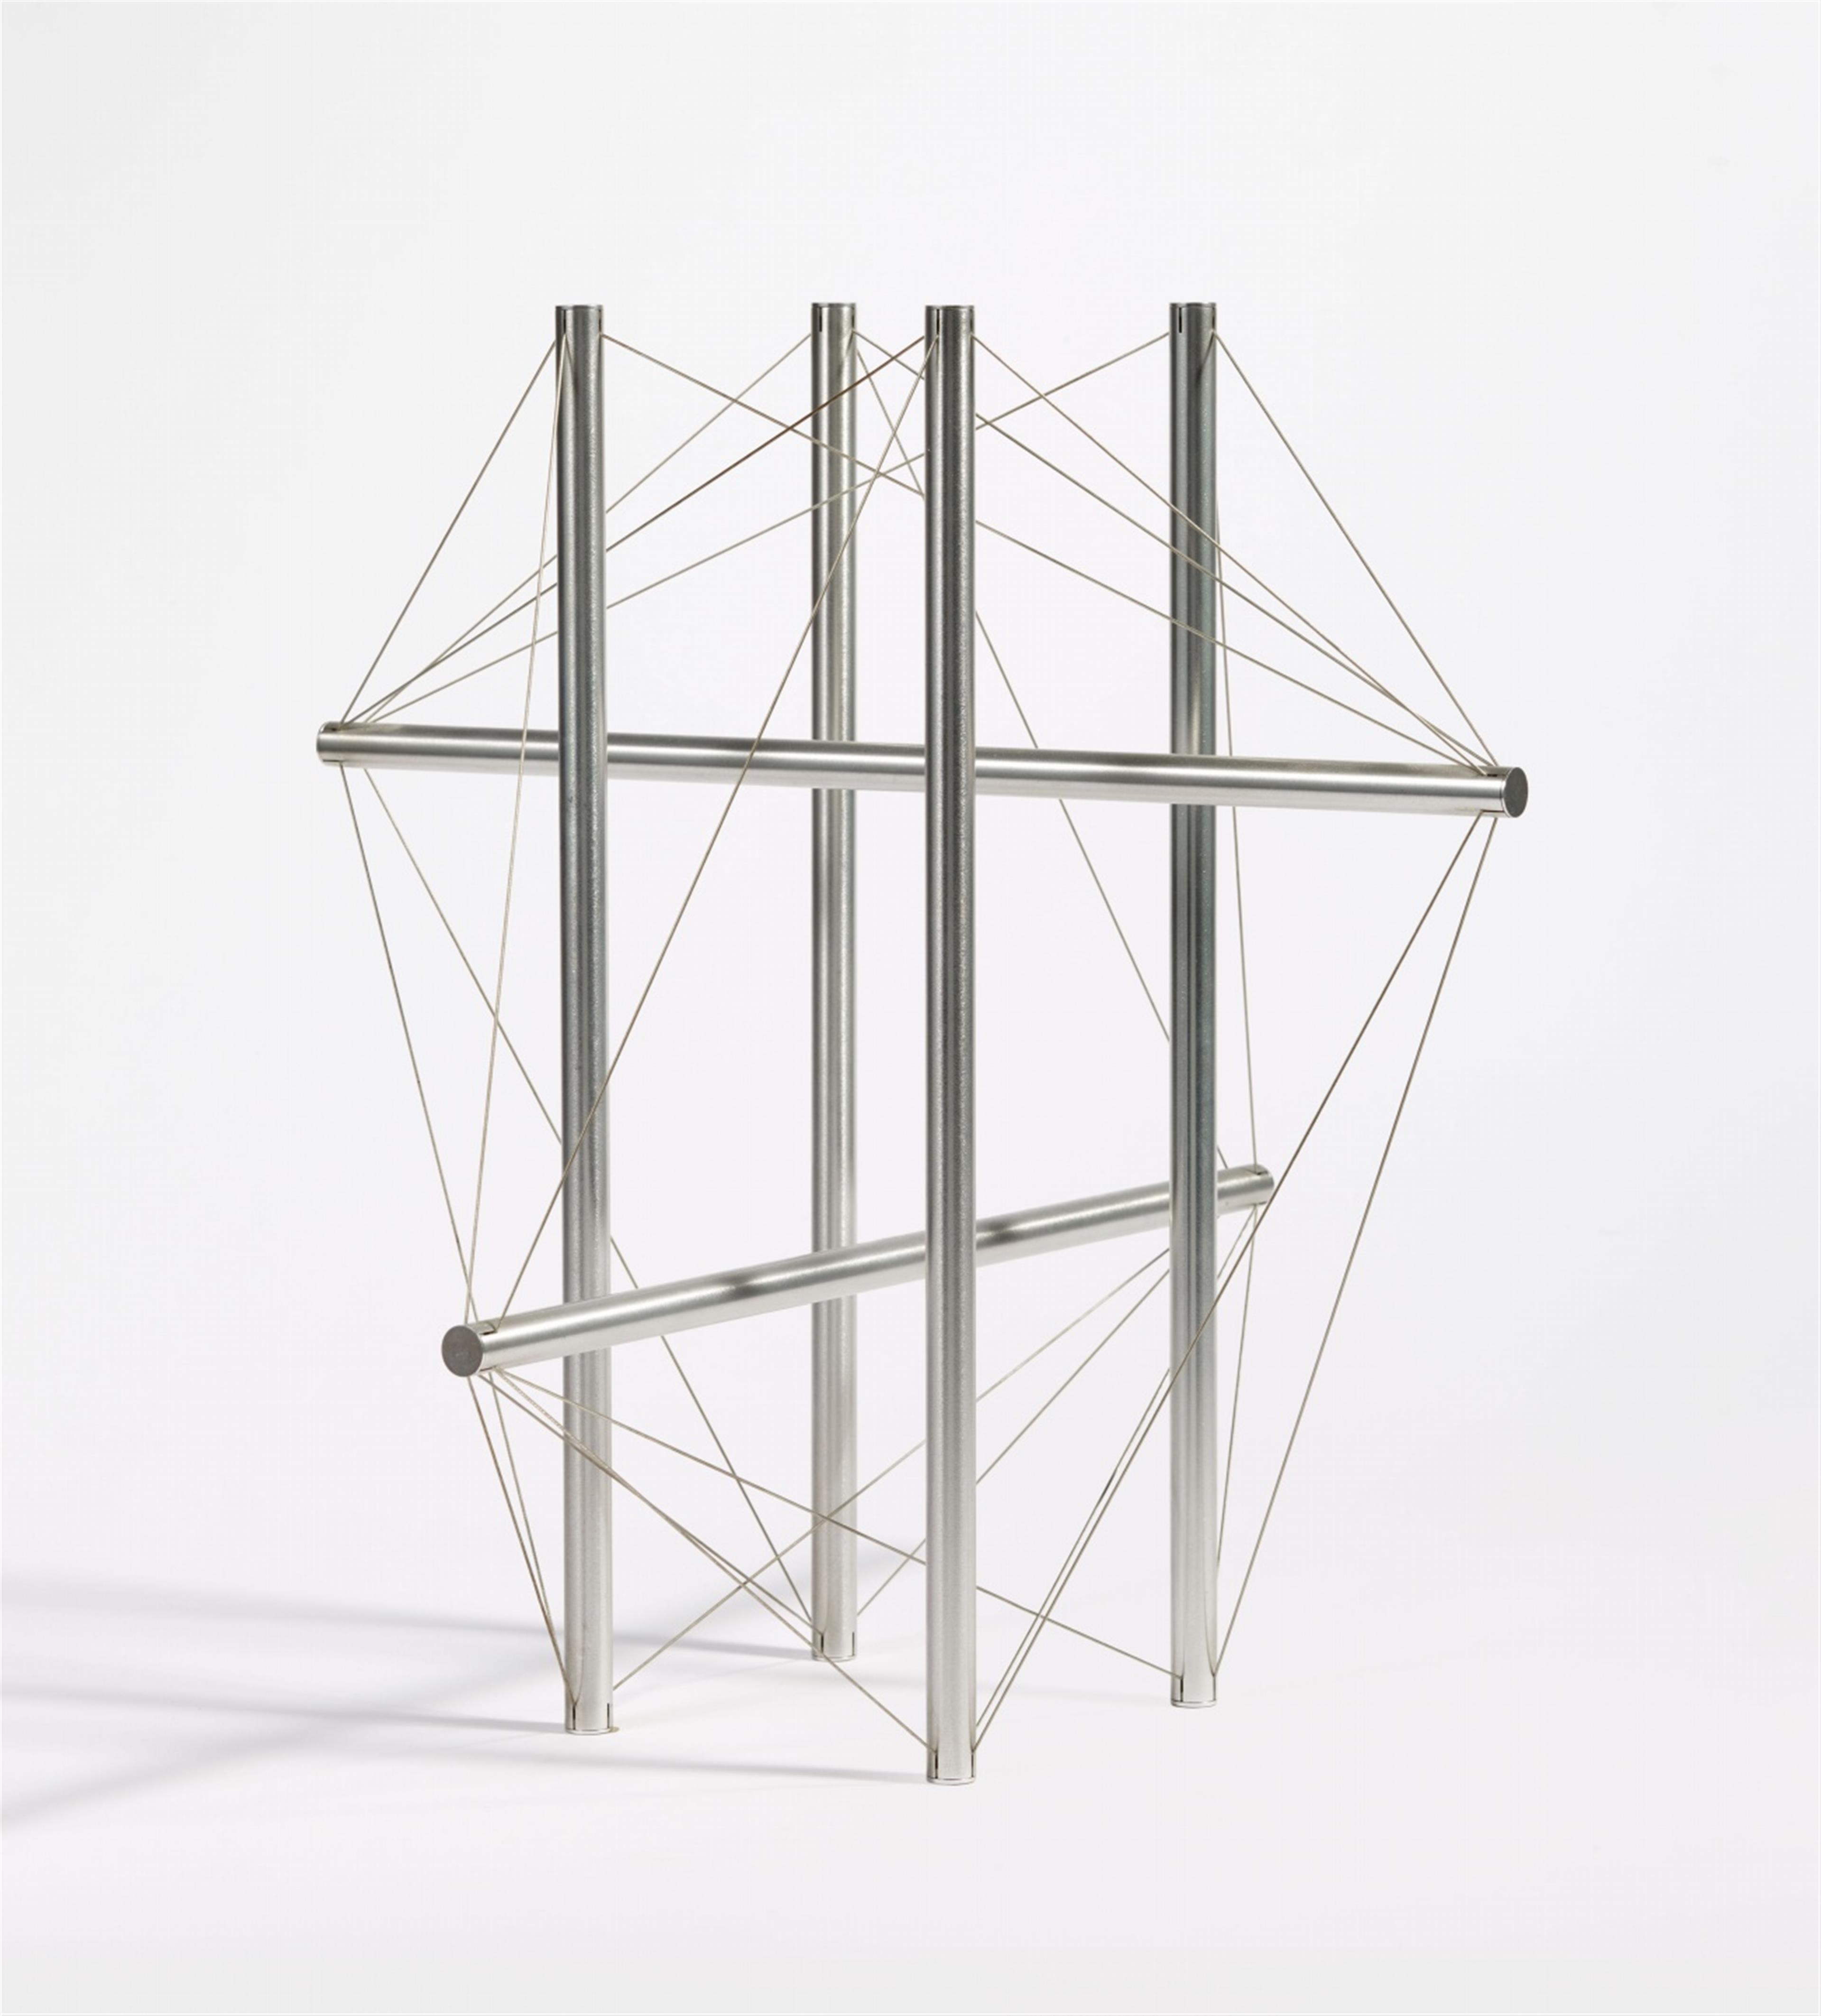 Kenneth Snelson - Maquette for Six #2 - image-1